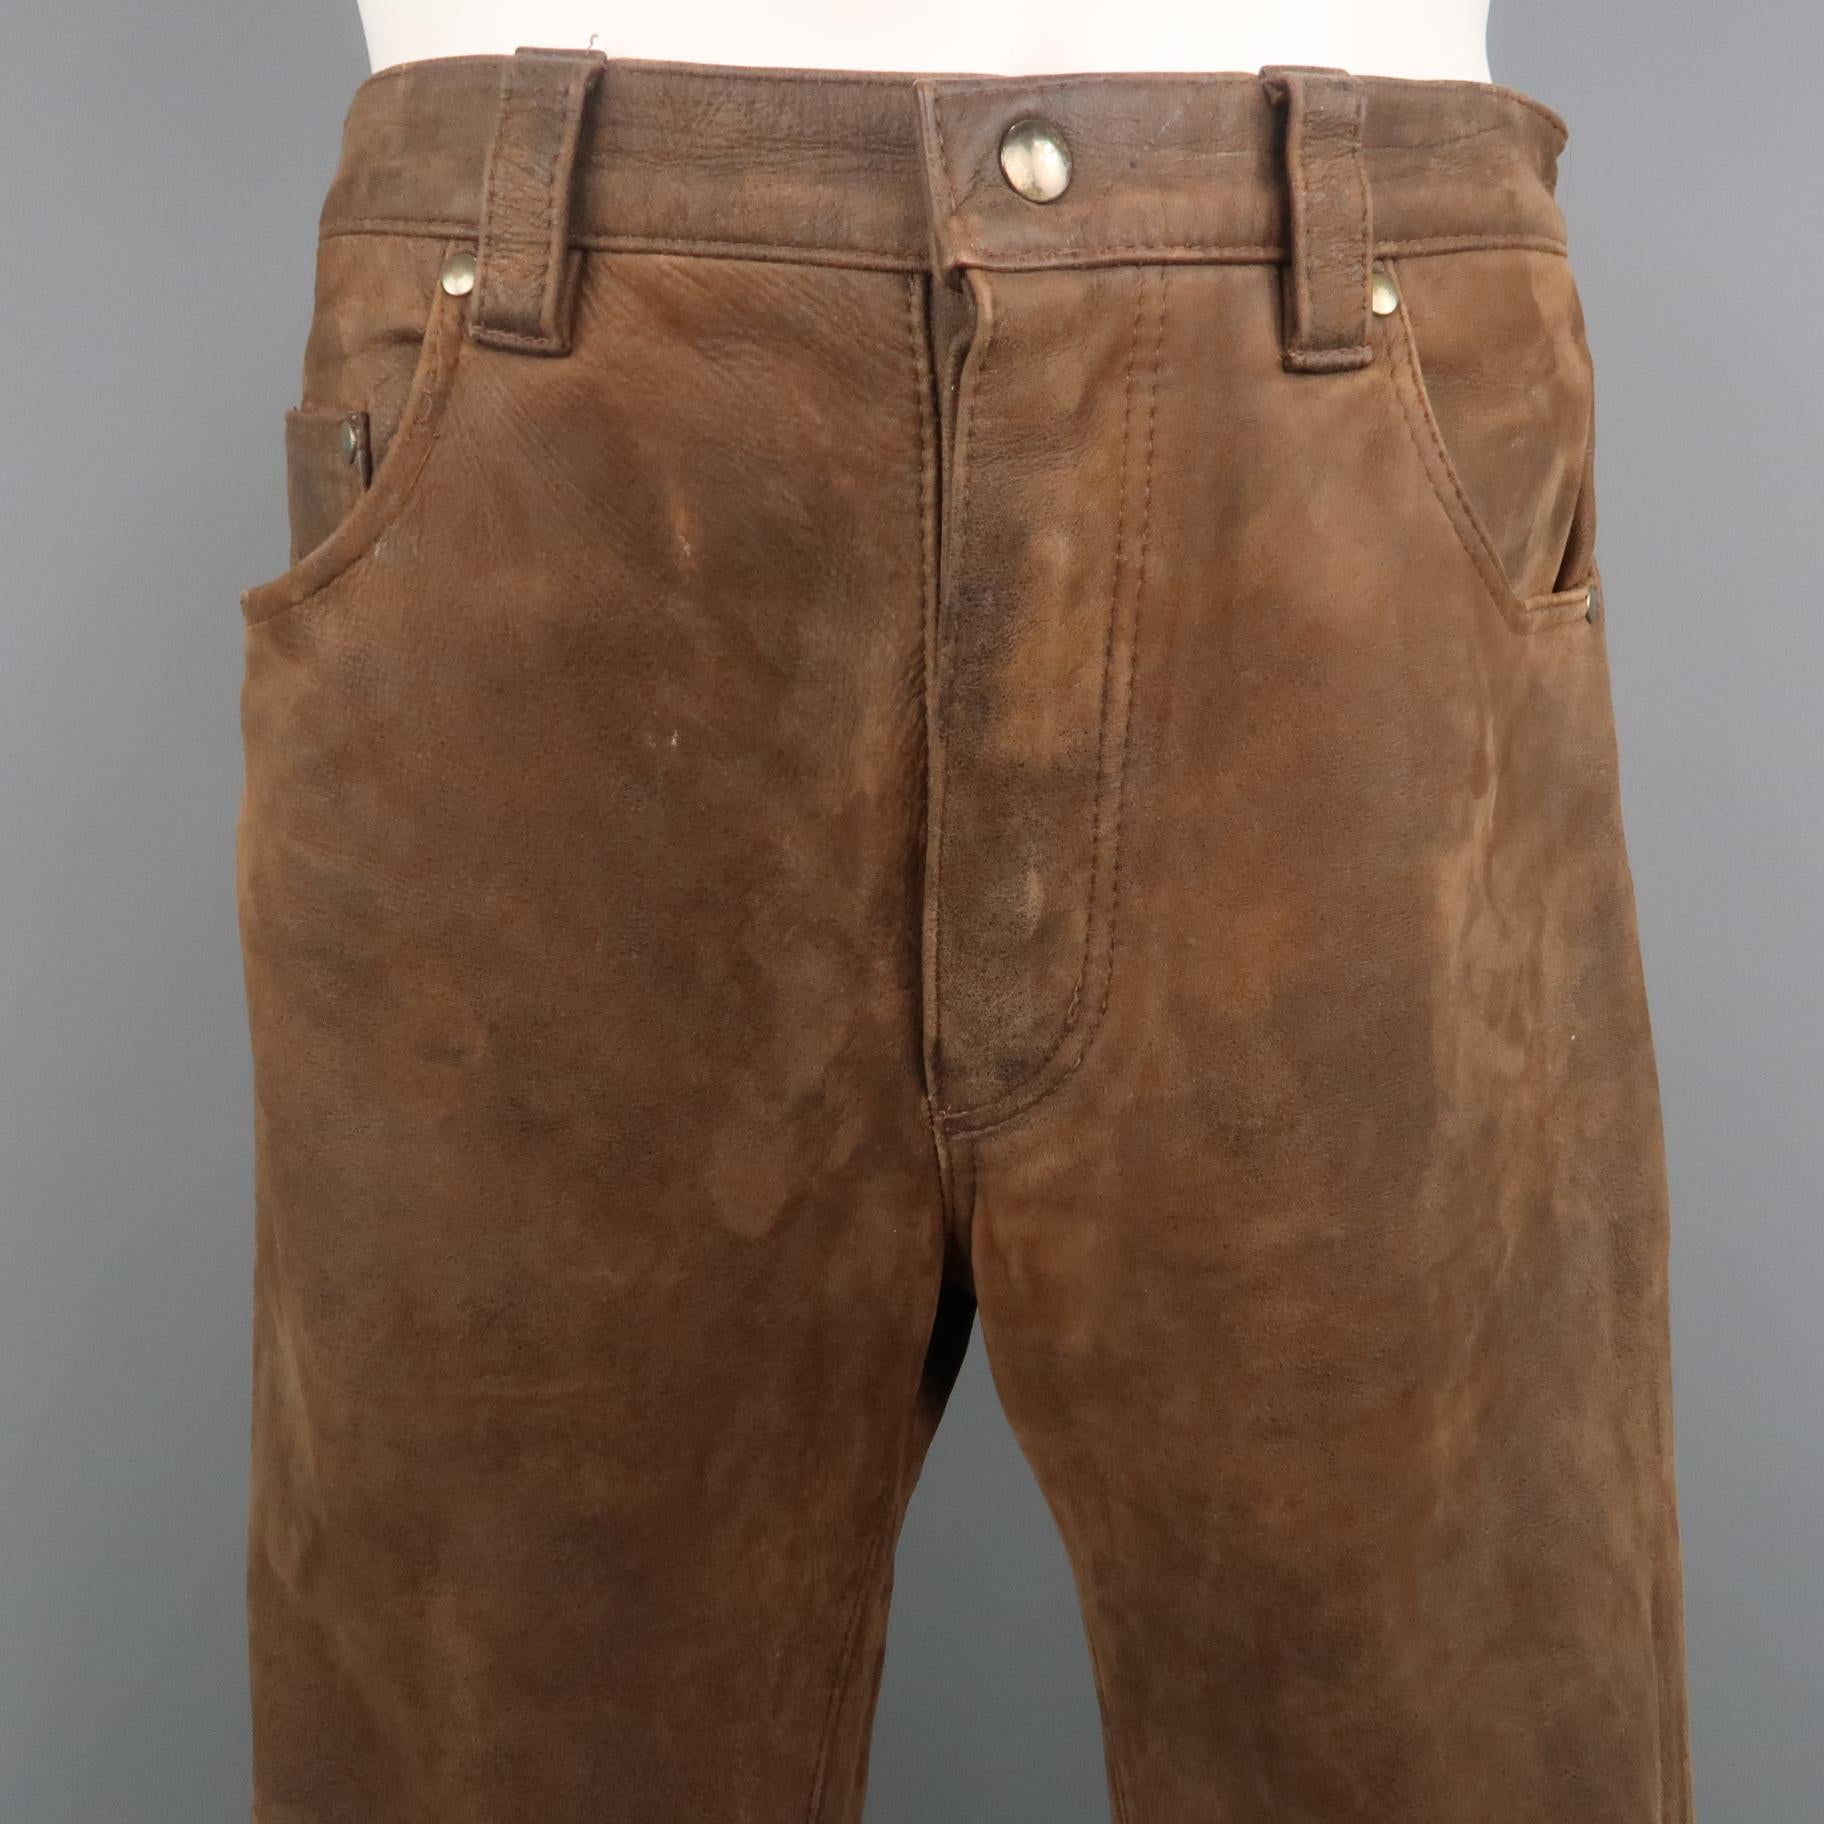 LEVI'S casual pant comes in a brown distressed leather featuring a flat front style and a button snap closure.
 
Very Good Pre-Owned Condition.
Marked: (No size)
 
Measurements:
 
Waist: 30 in.
Rise: 10 in.
Inseam: 29 in.